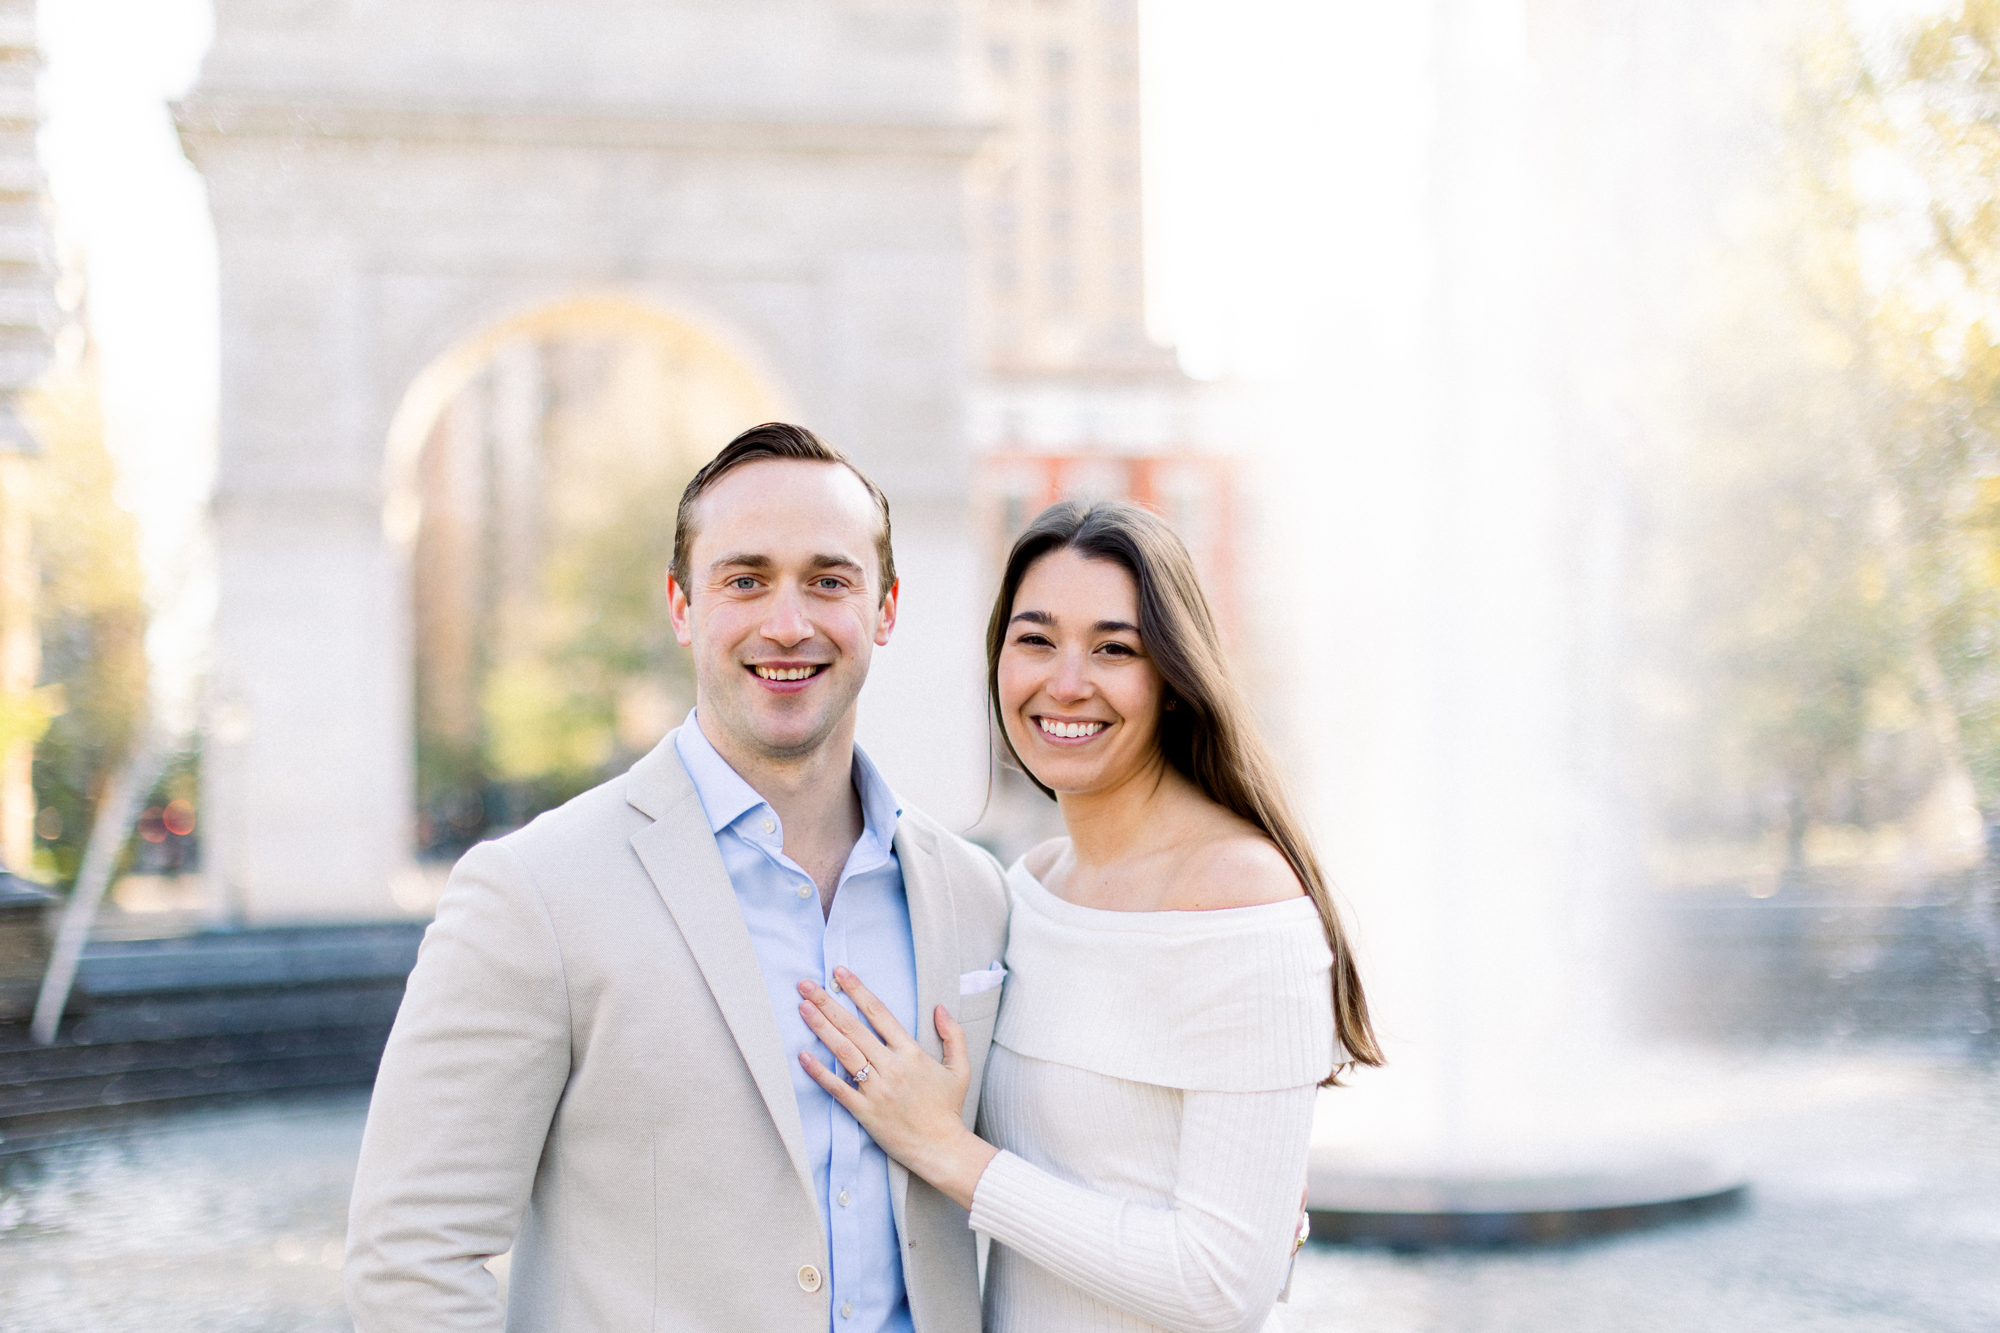 Glowing Spring Engagement Photos in Washington Square Park NYC